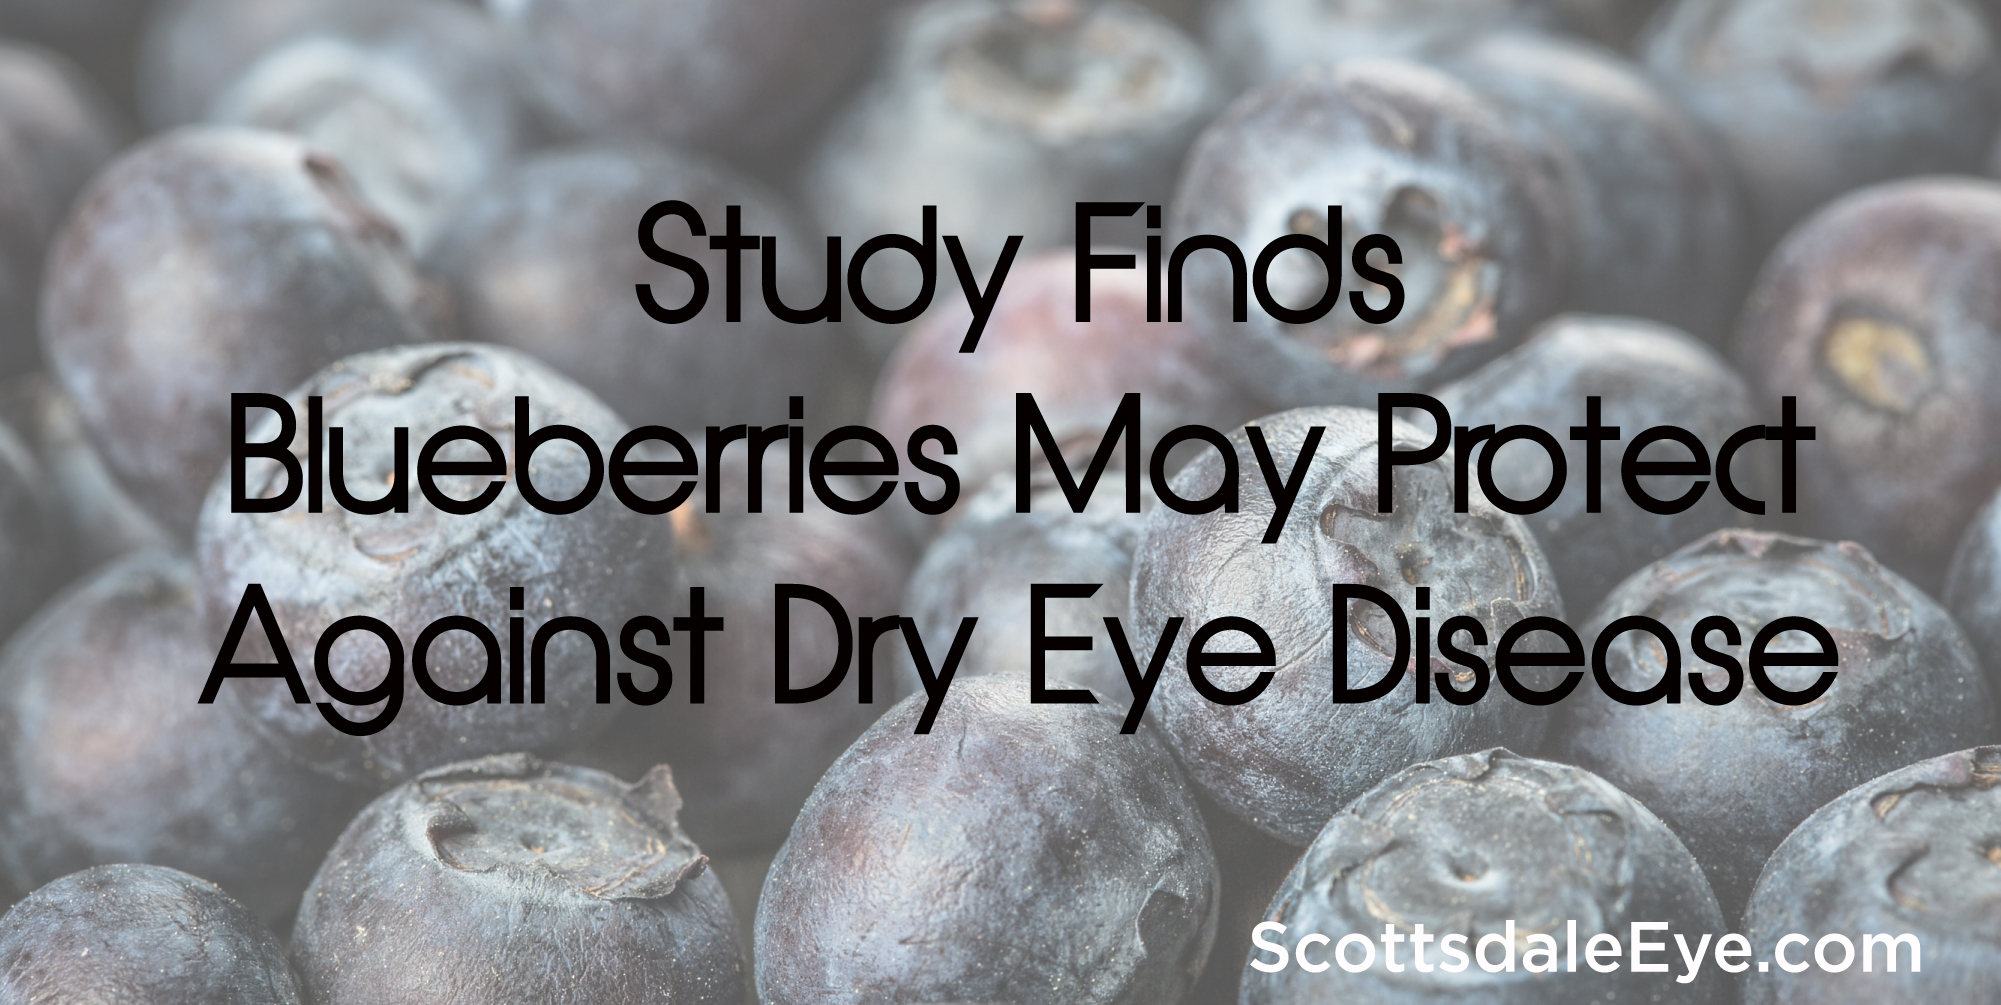 Study finds blueberries may protect against dry eye disease!